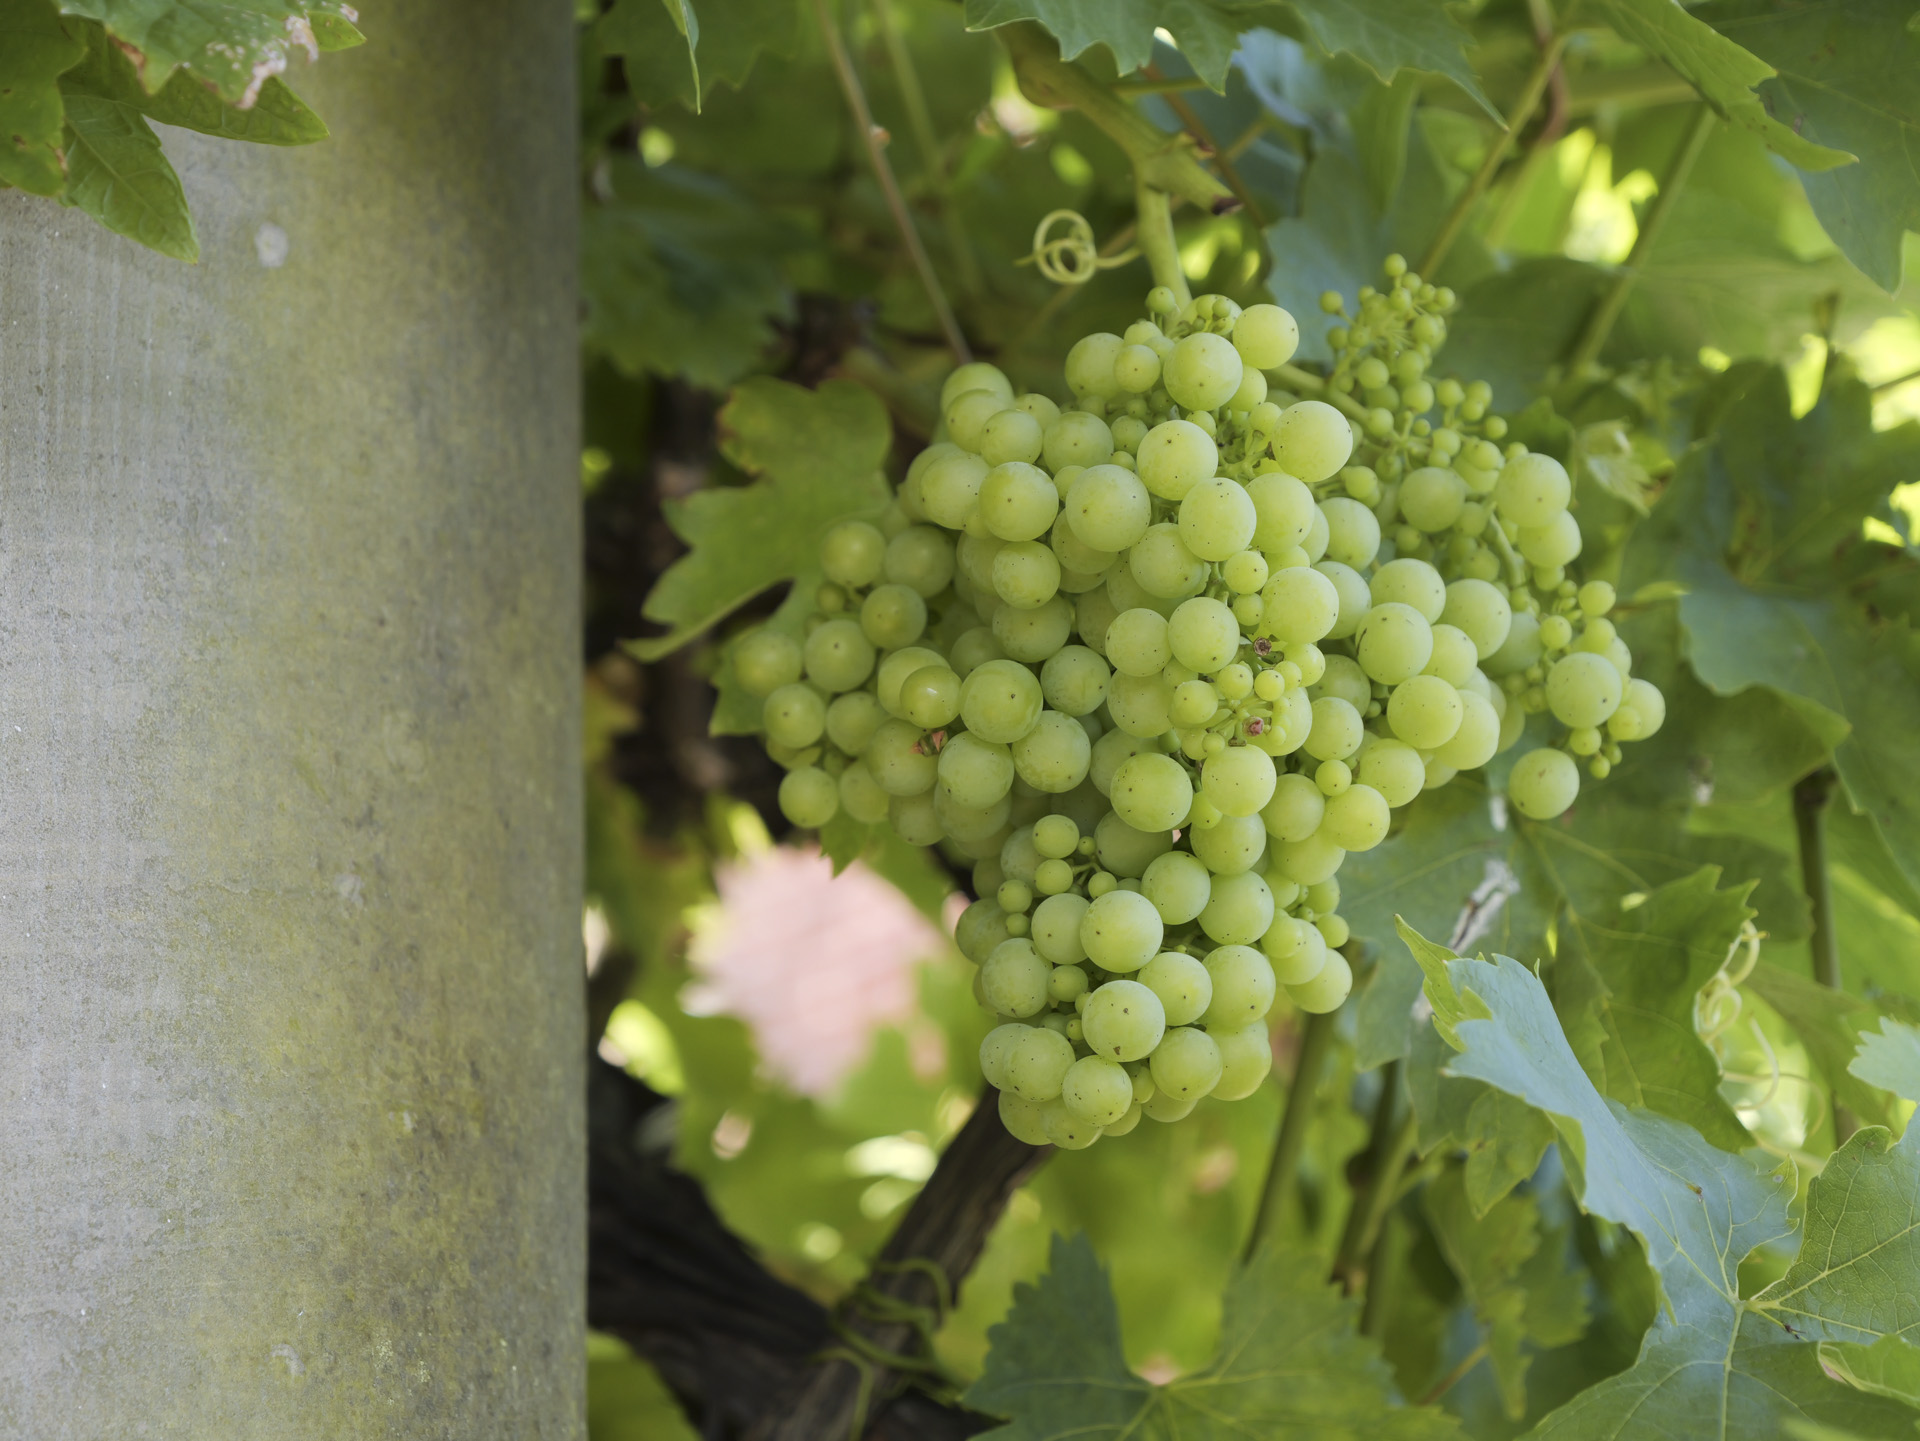 Closeup of grapes on the vine